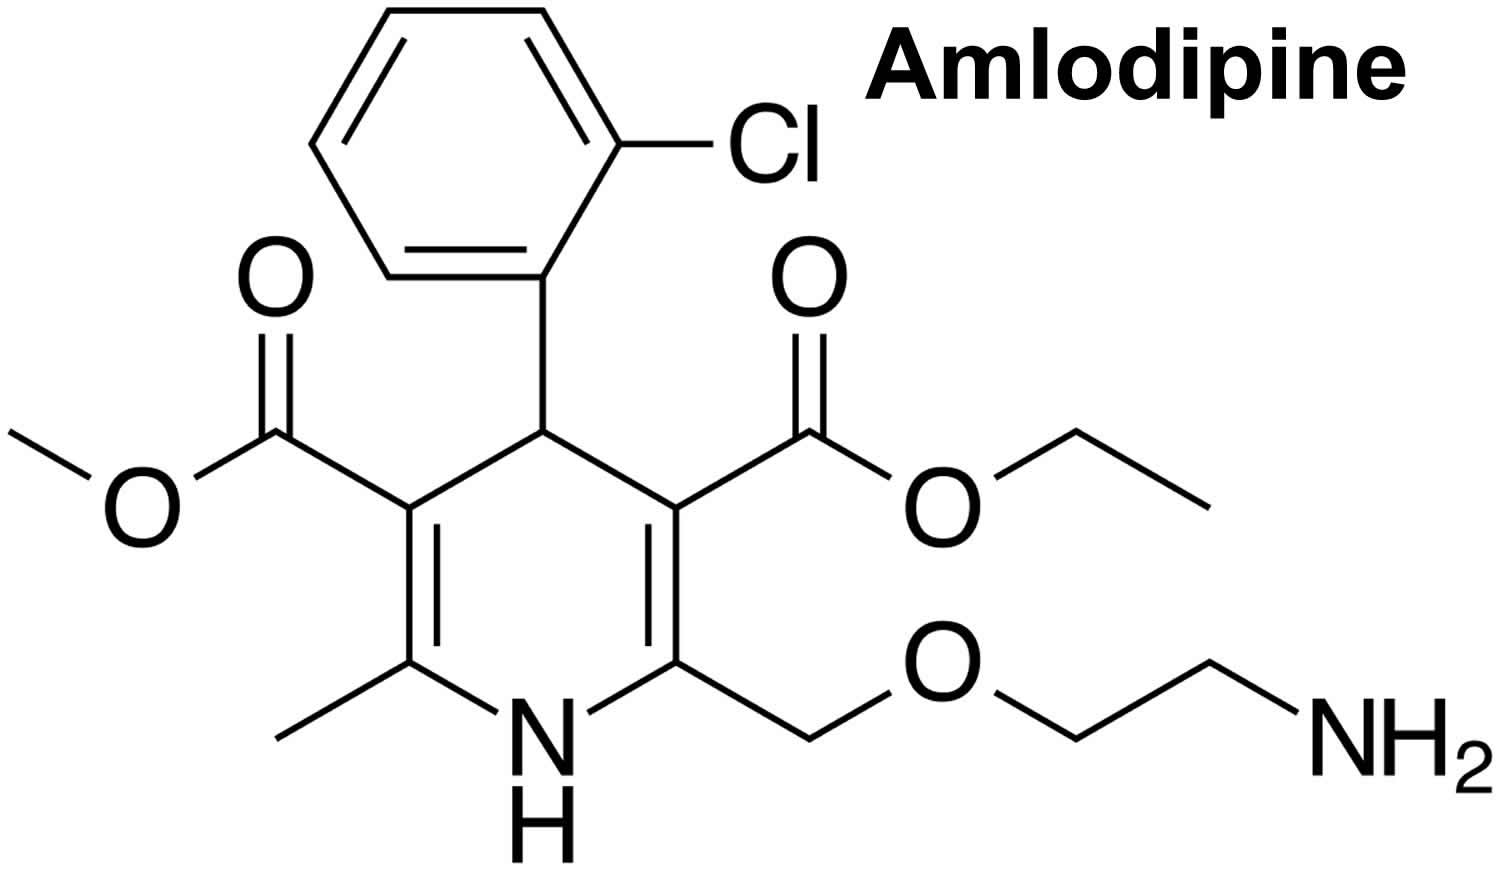 amlodipine-mechanism-of-action-amlodipine-besylate-uses-dosage-side